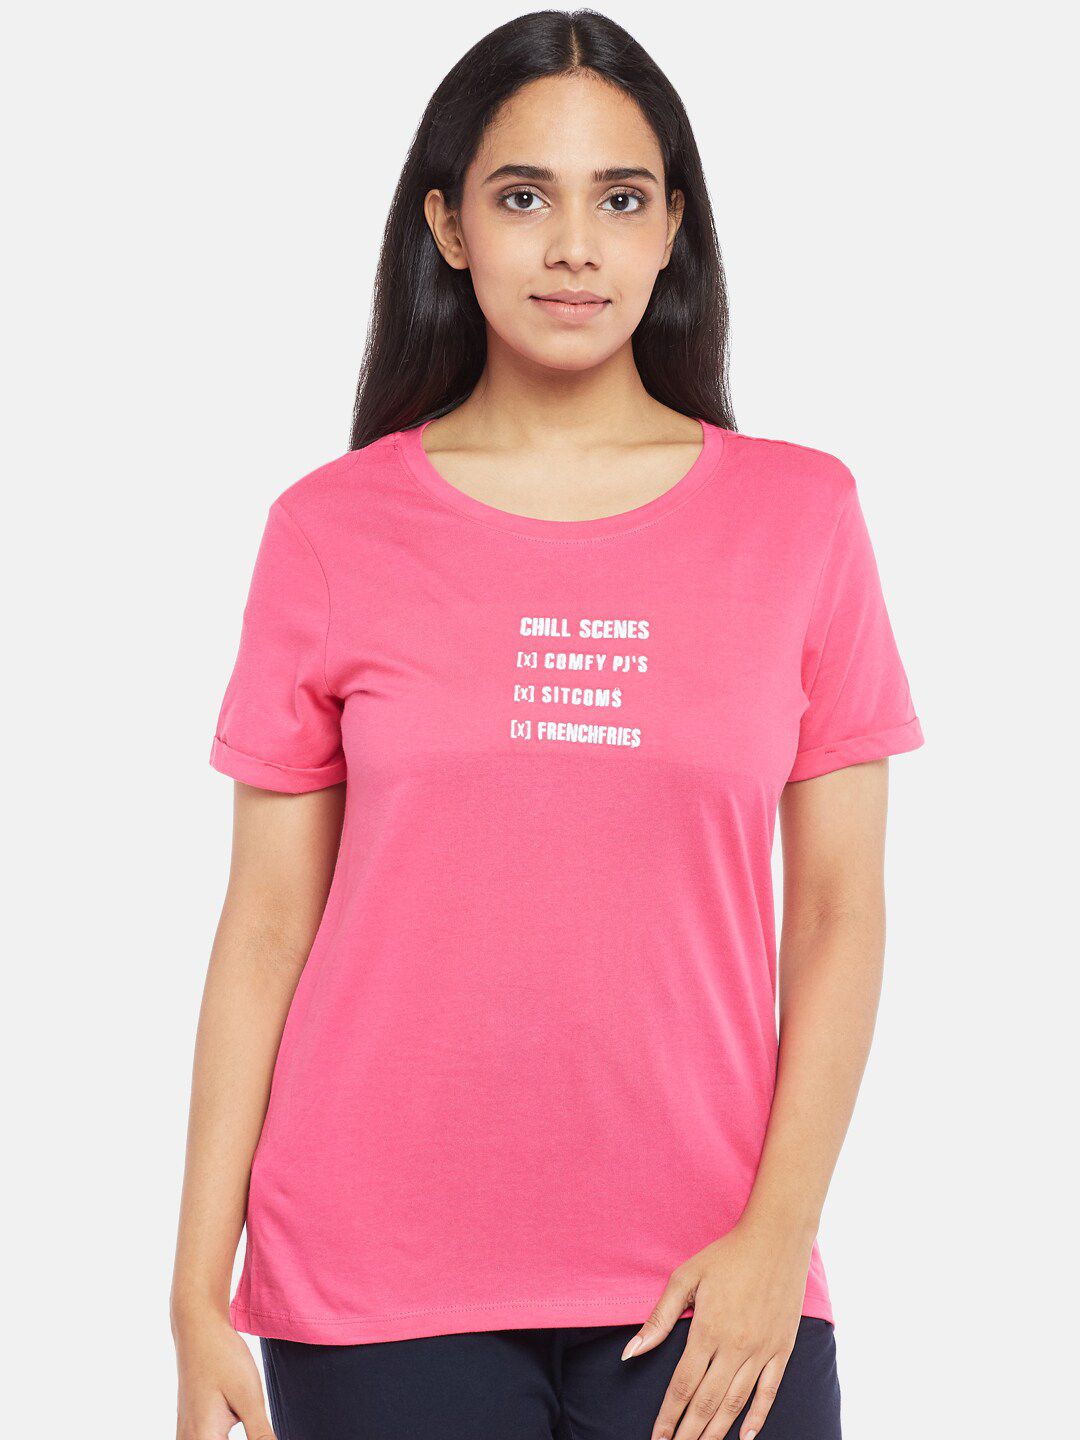 Dreamz by Pantaloons Women Pink & White Typography Printed Cotton Lounge T-shirt Price in India